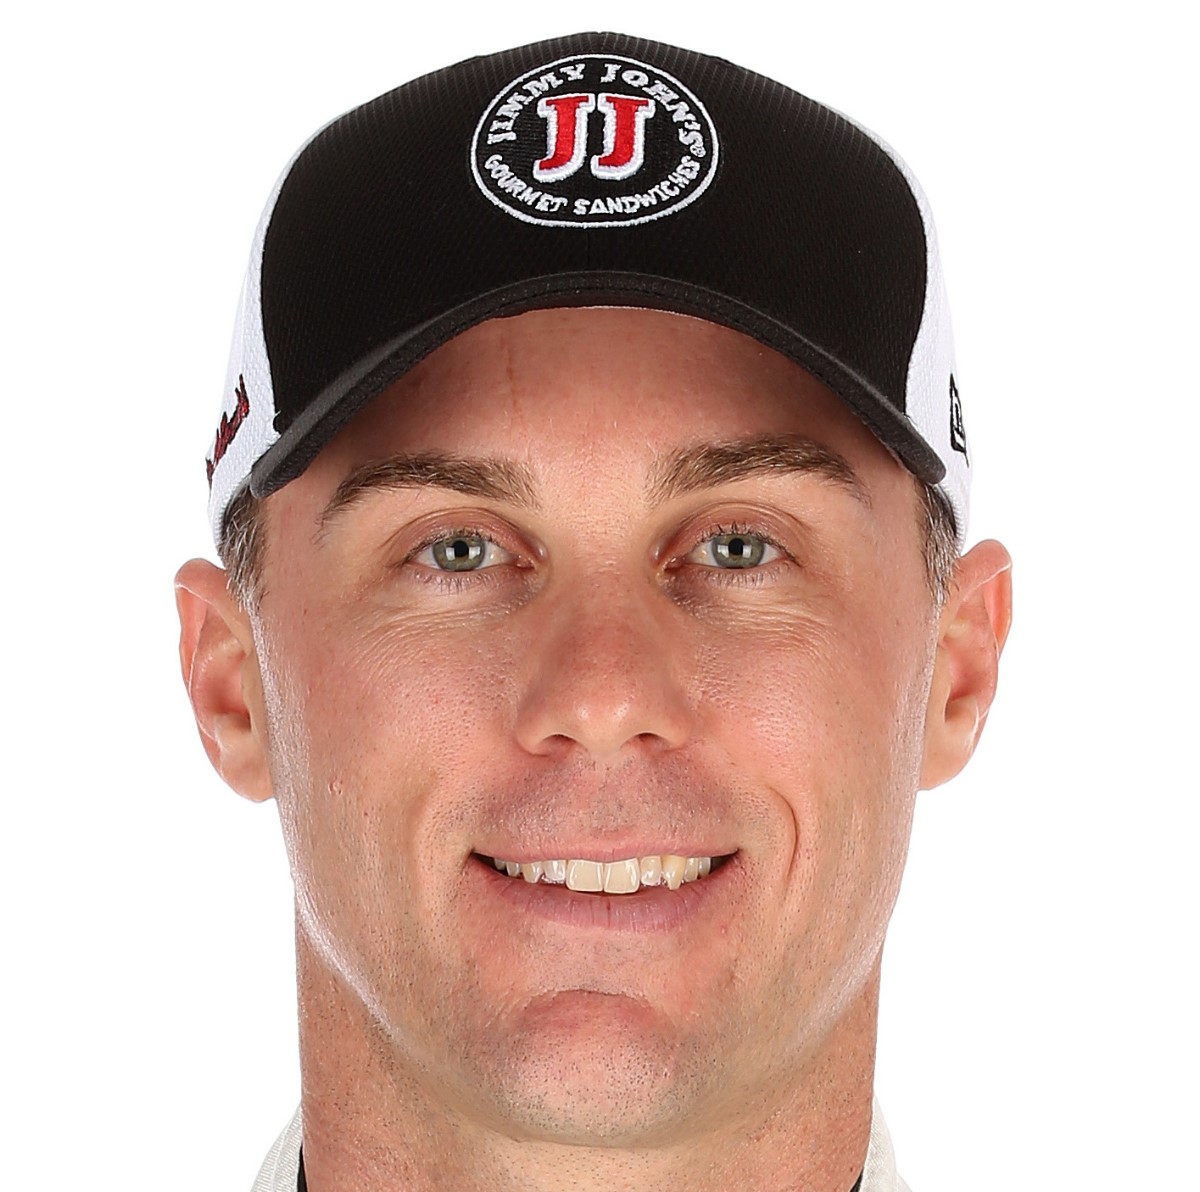 Busch may be champion but Harvick took home the most loot